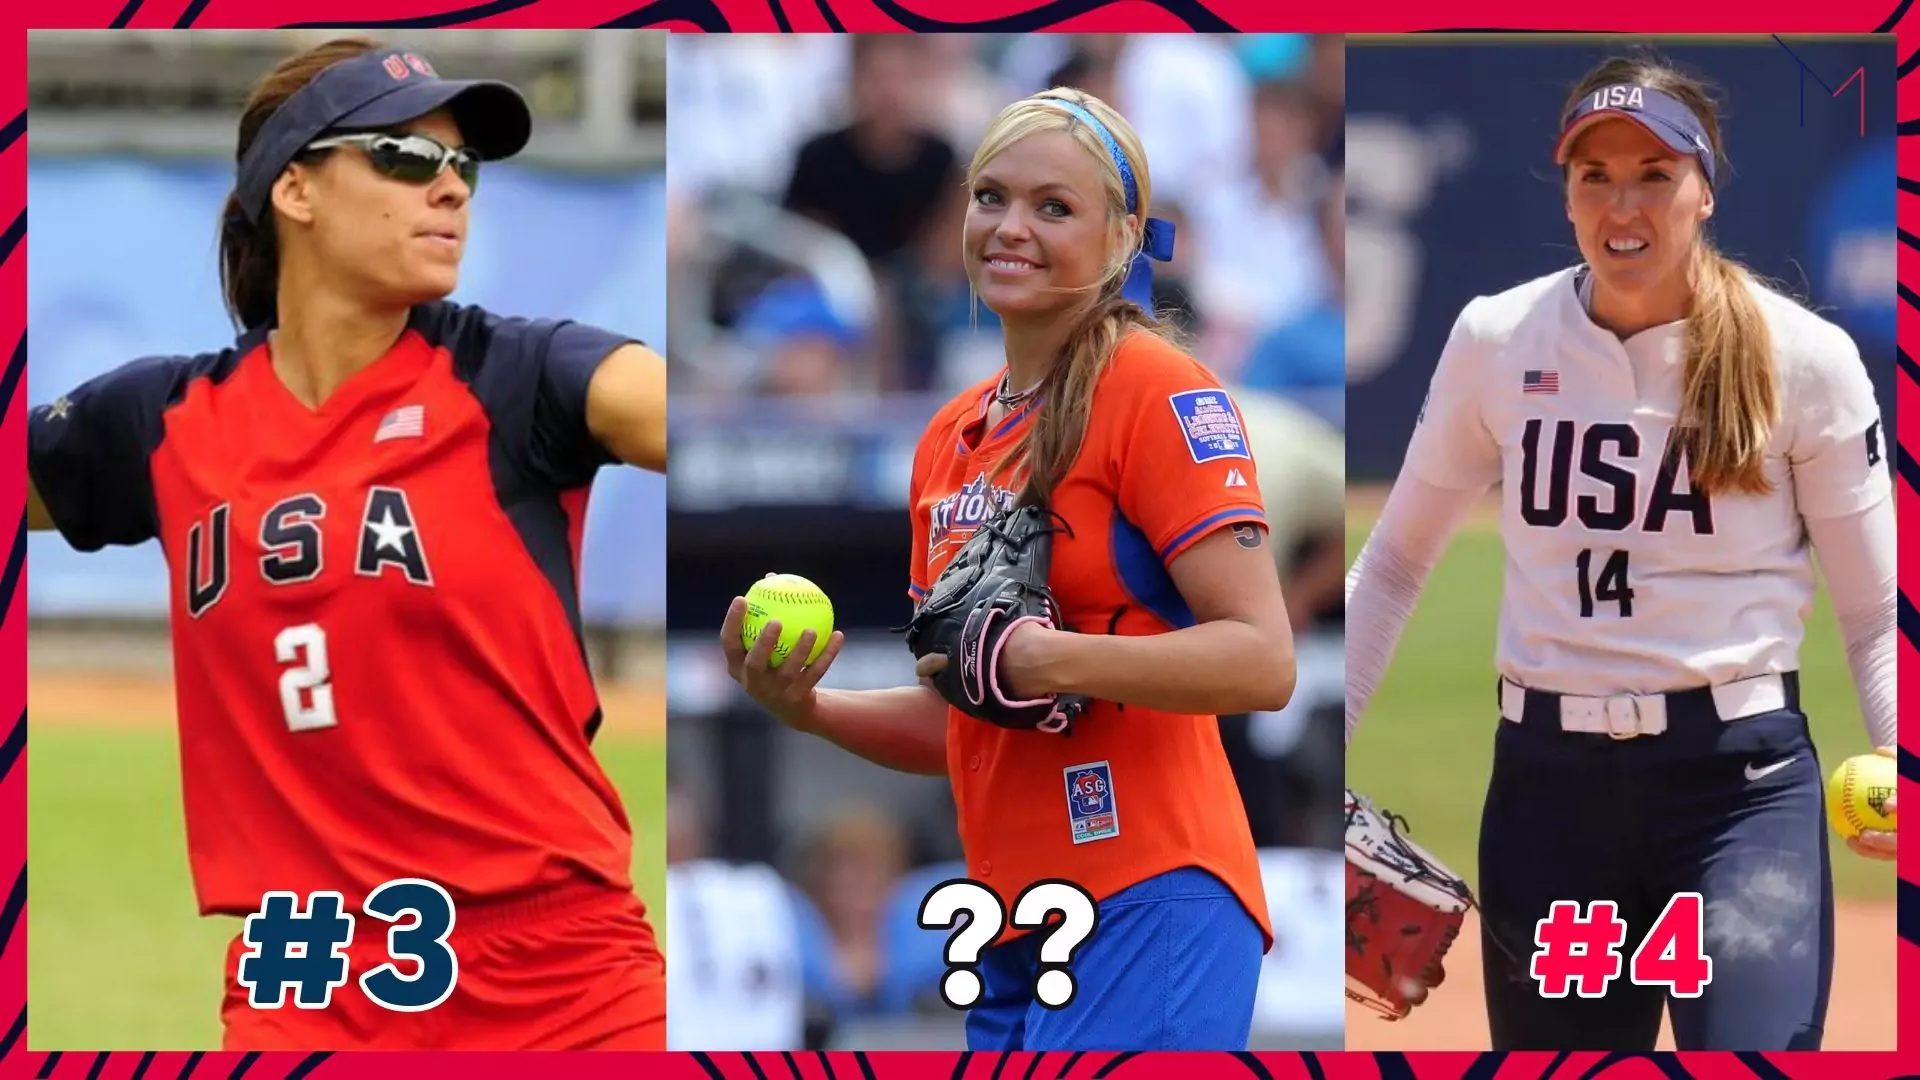 Top 10 most popular Softball players from the USA of All Time - Famous softball players from America